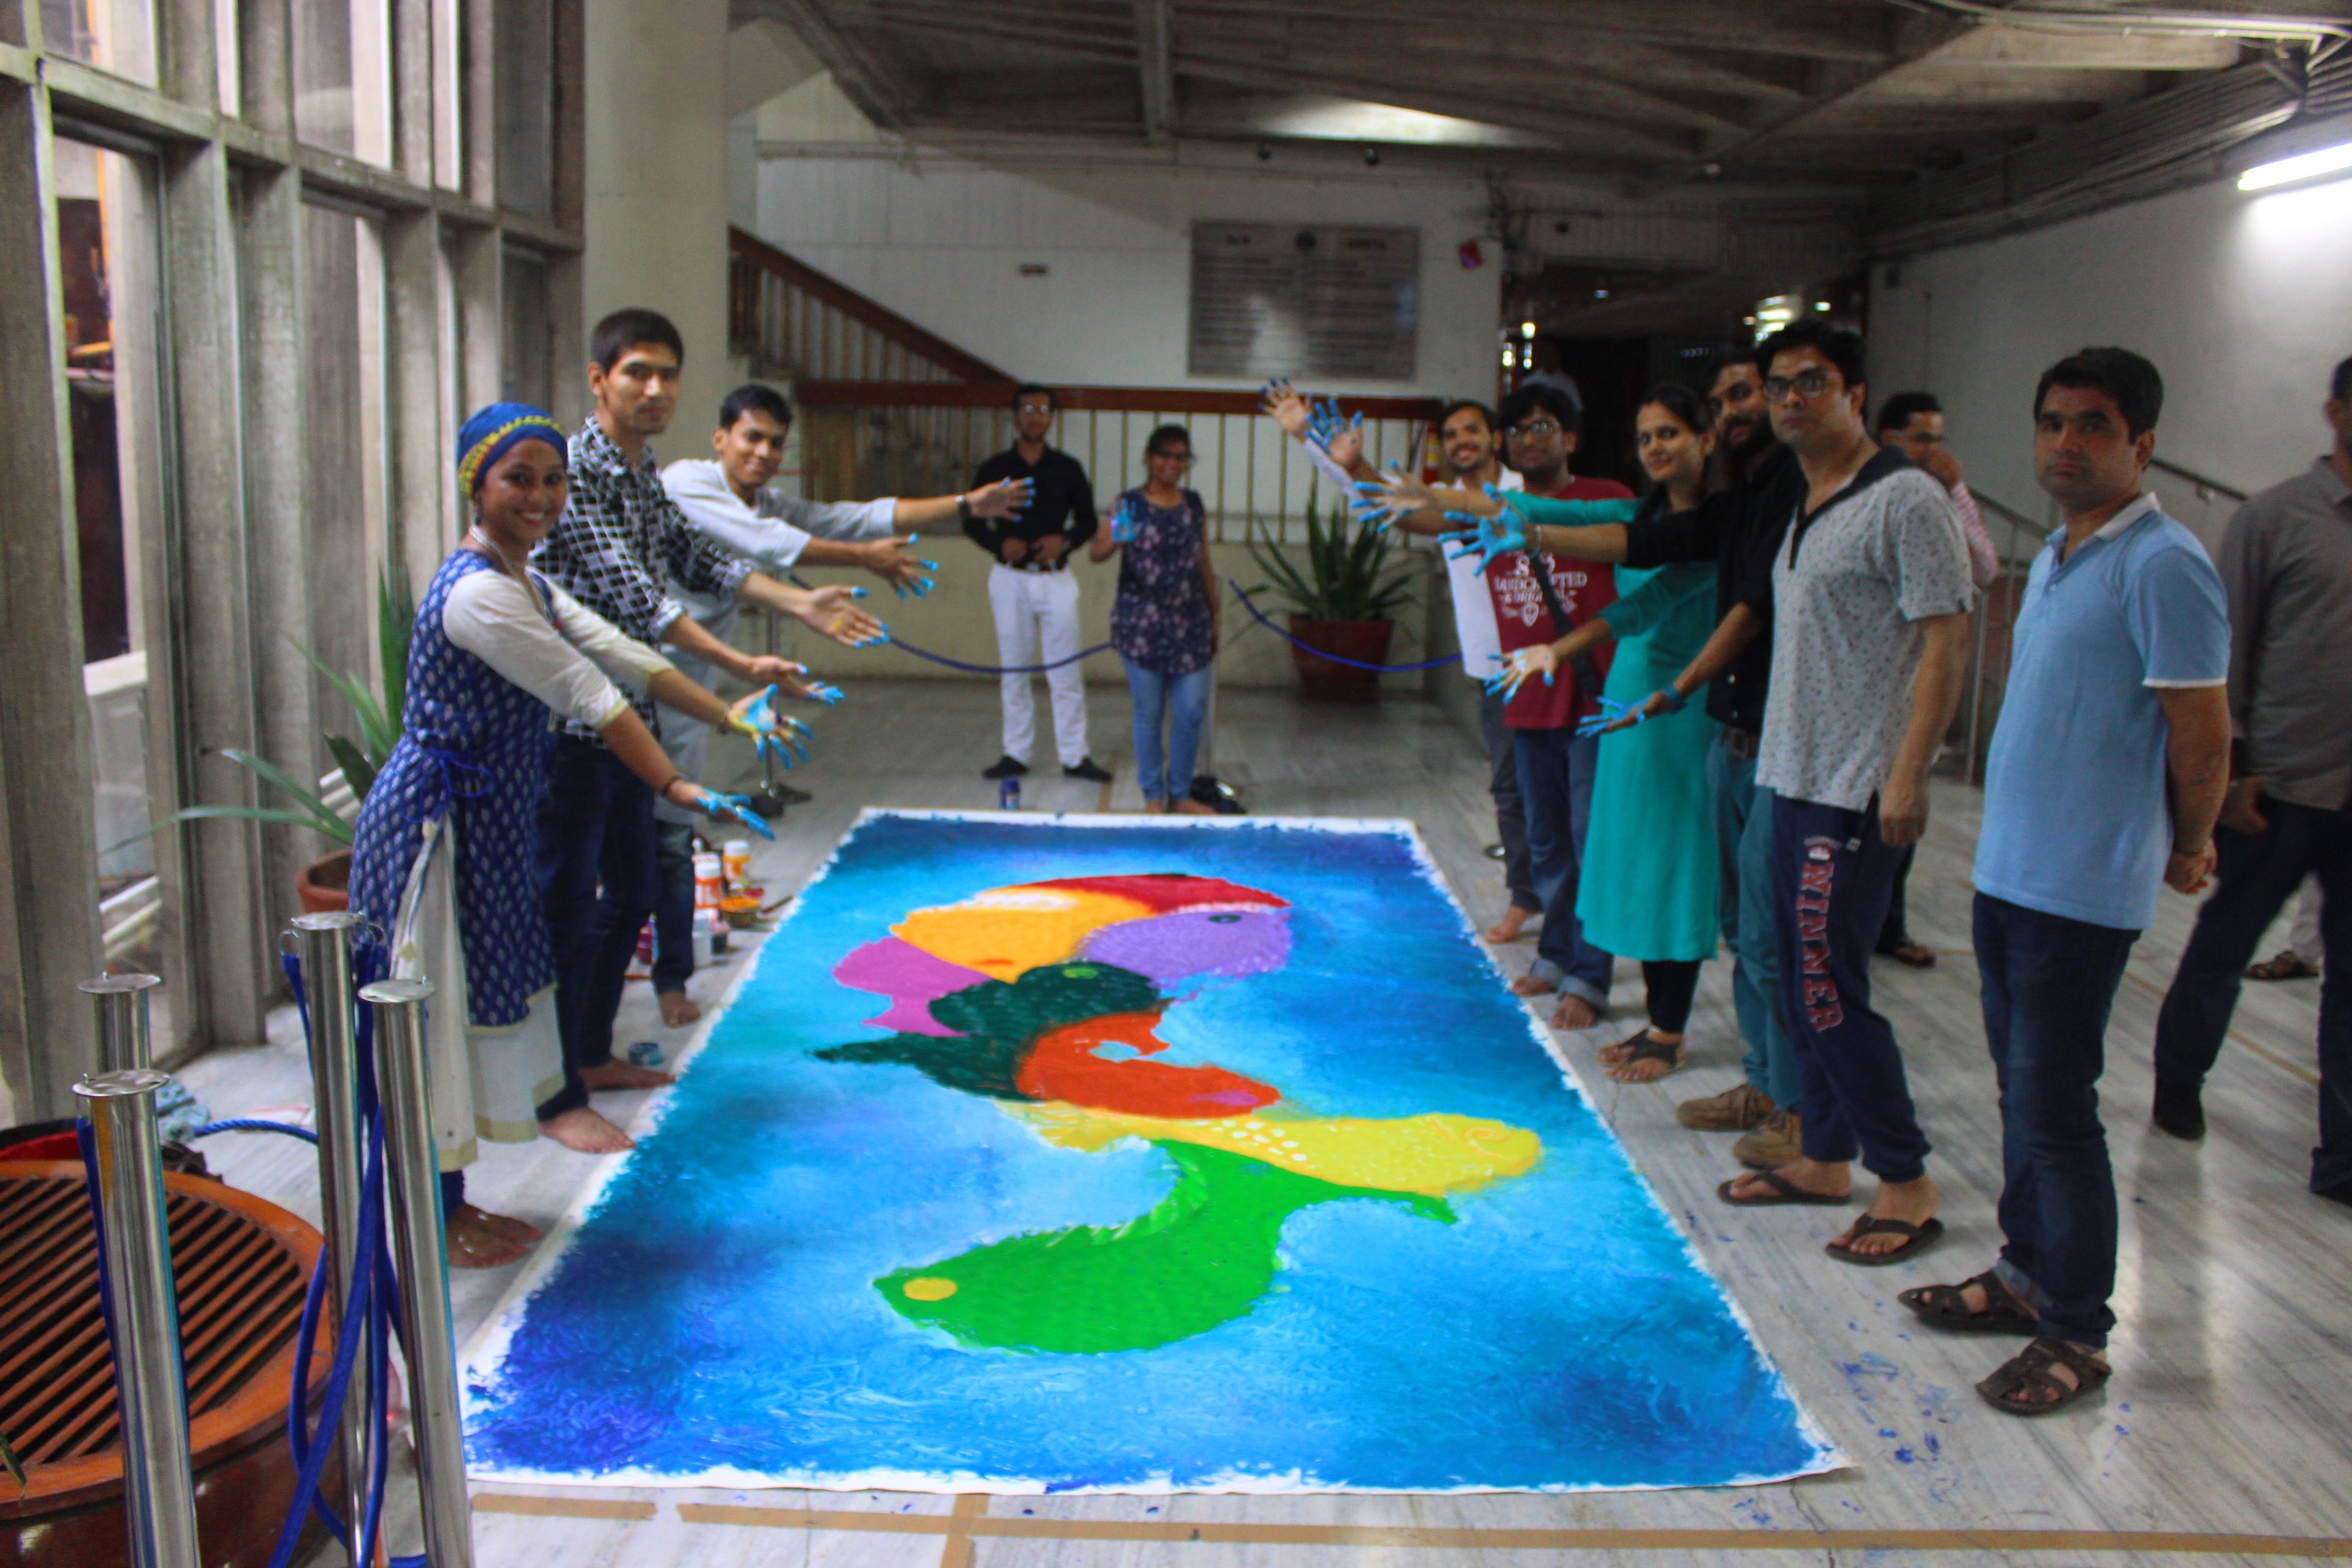 Part of the relational art project Artologue at South Asia University